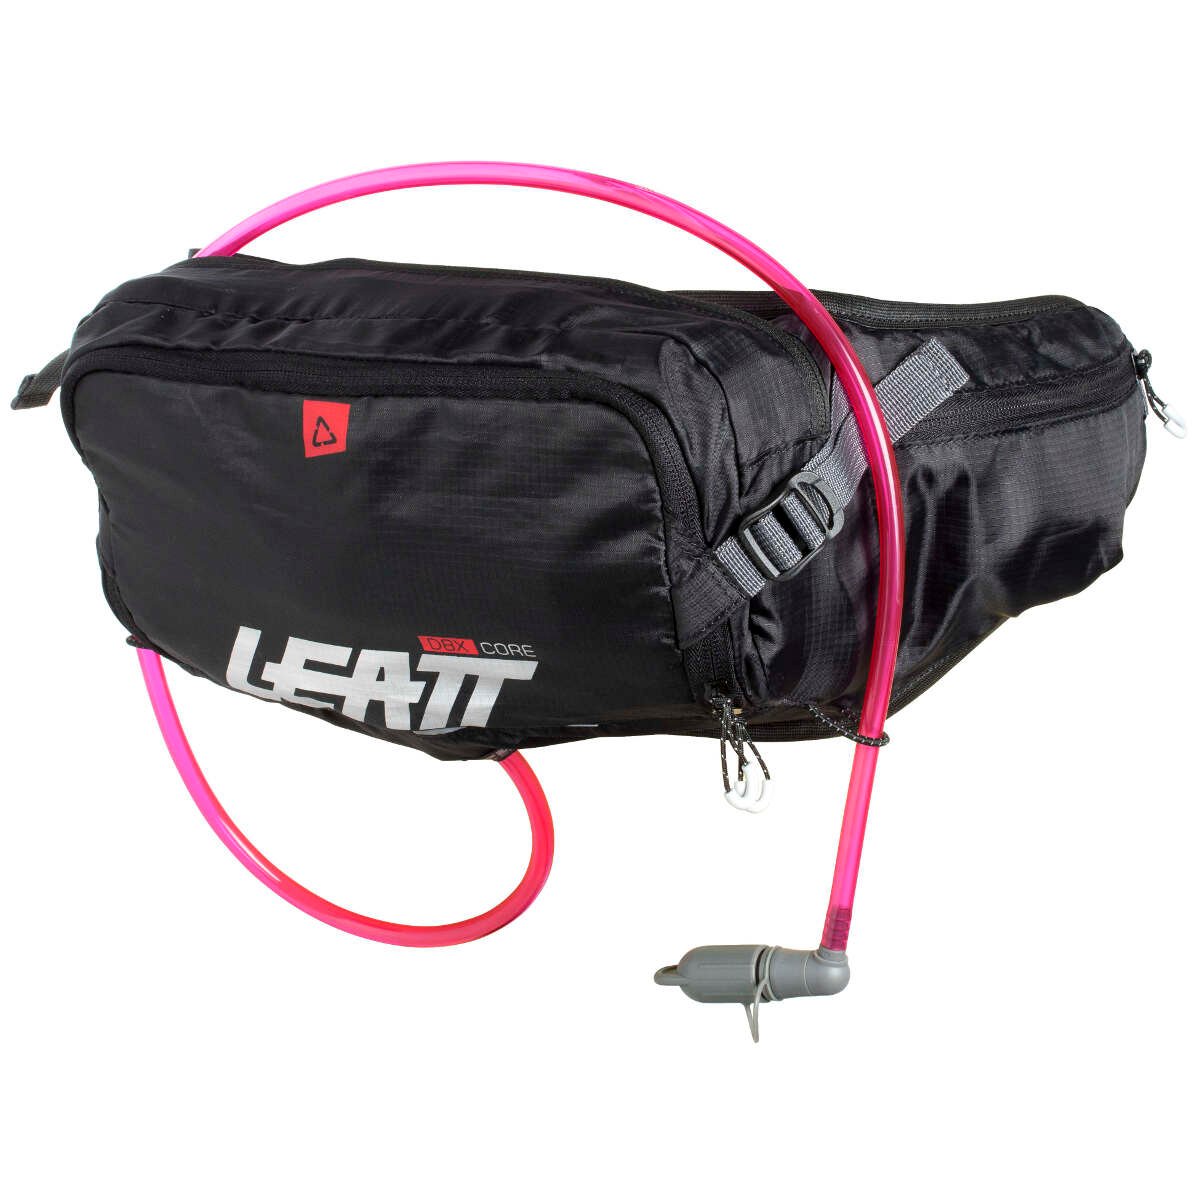 Leatt Hip Pack with Hydration System Core 2.0 Graphite, 5 l